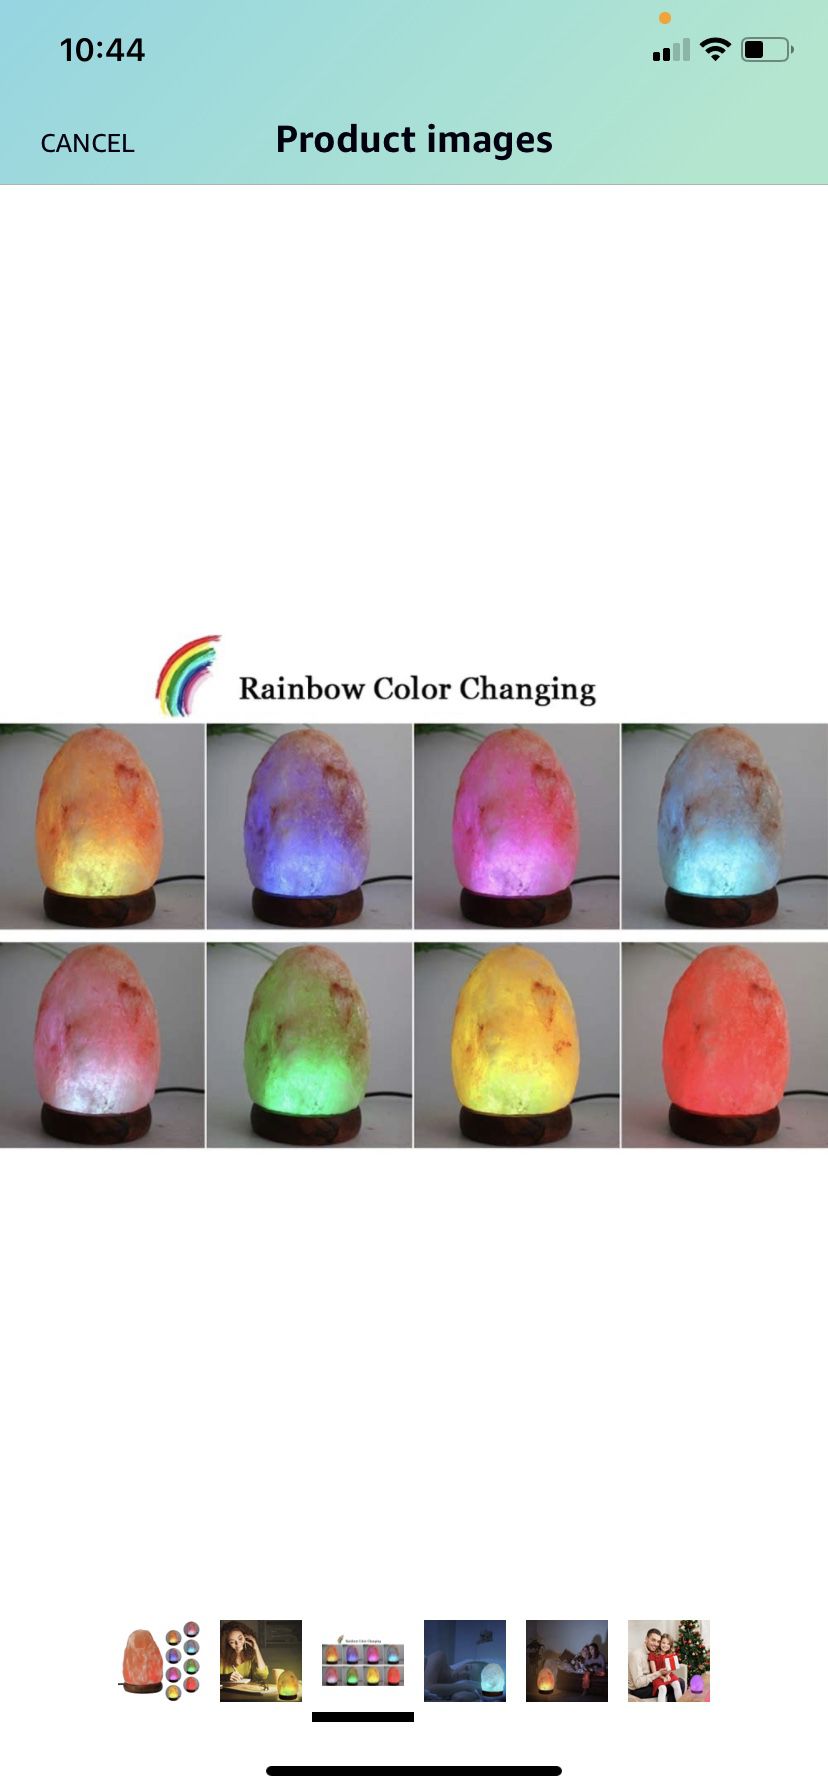 FANHAO USB Himalayan Salt Lamp with 7 Colors Changing, Natural Crystal Salt Rock Lamp Table Lamps for Air Purifying, Home Décor - Hand Carved, LED Bul